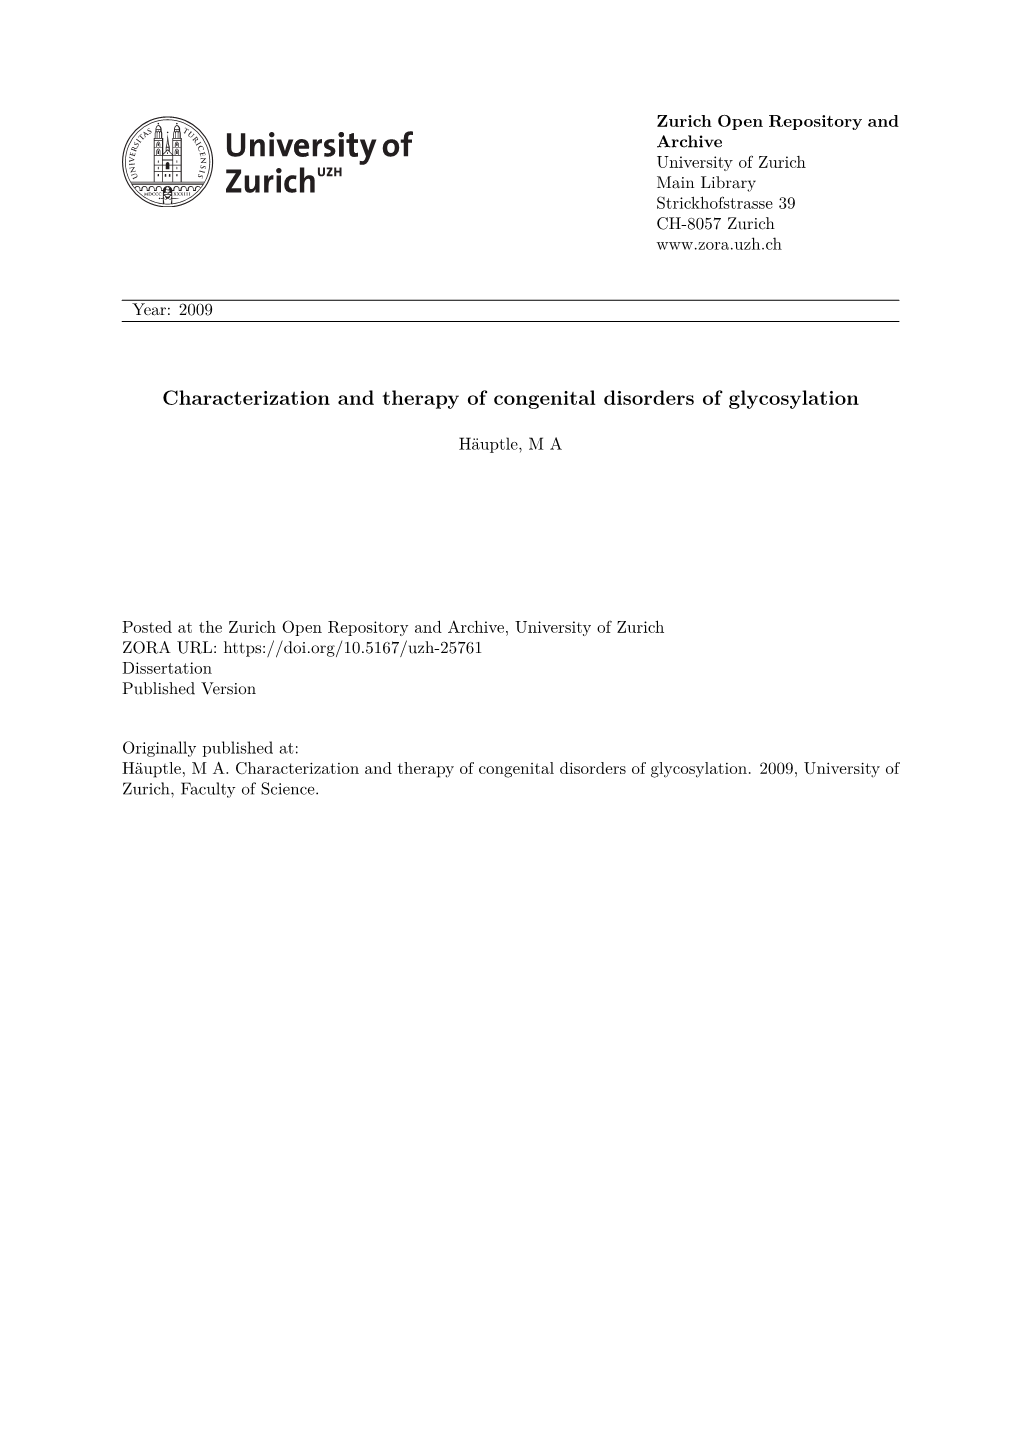 Characterization and Therapy of Congenital Disorders of Glycosylation